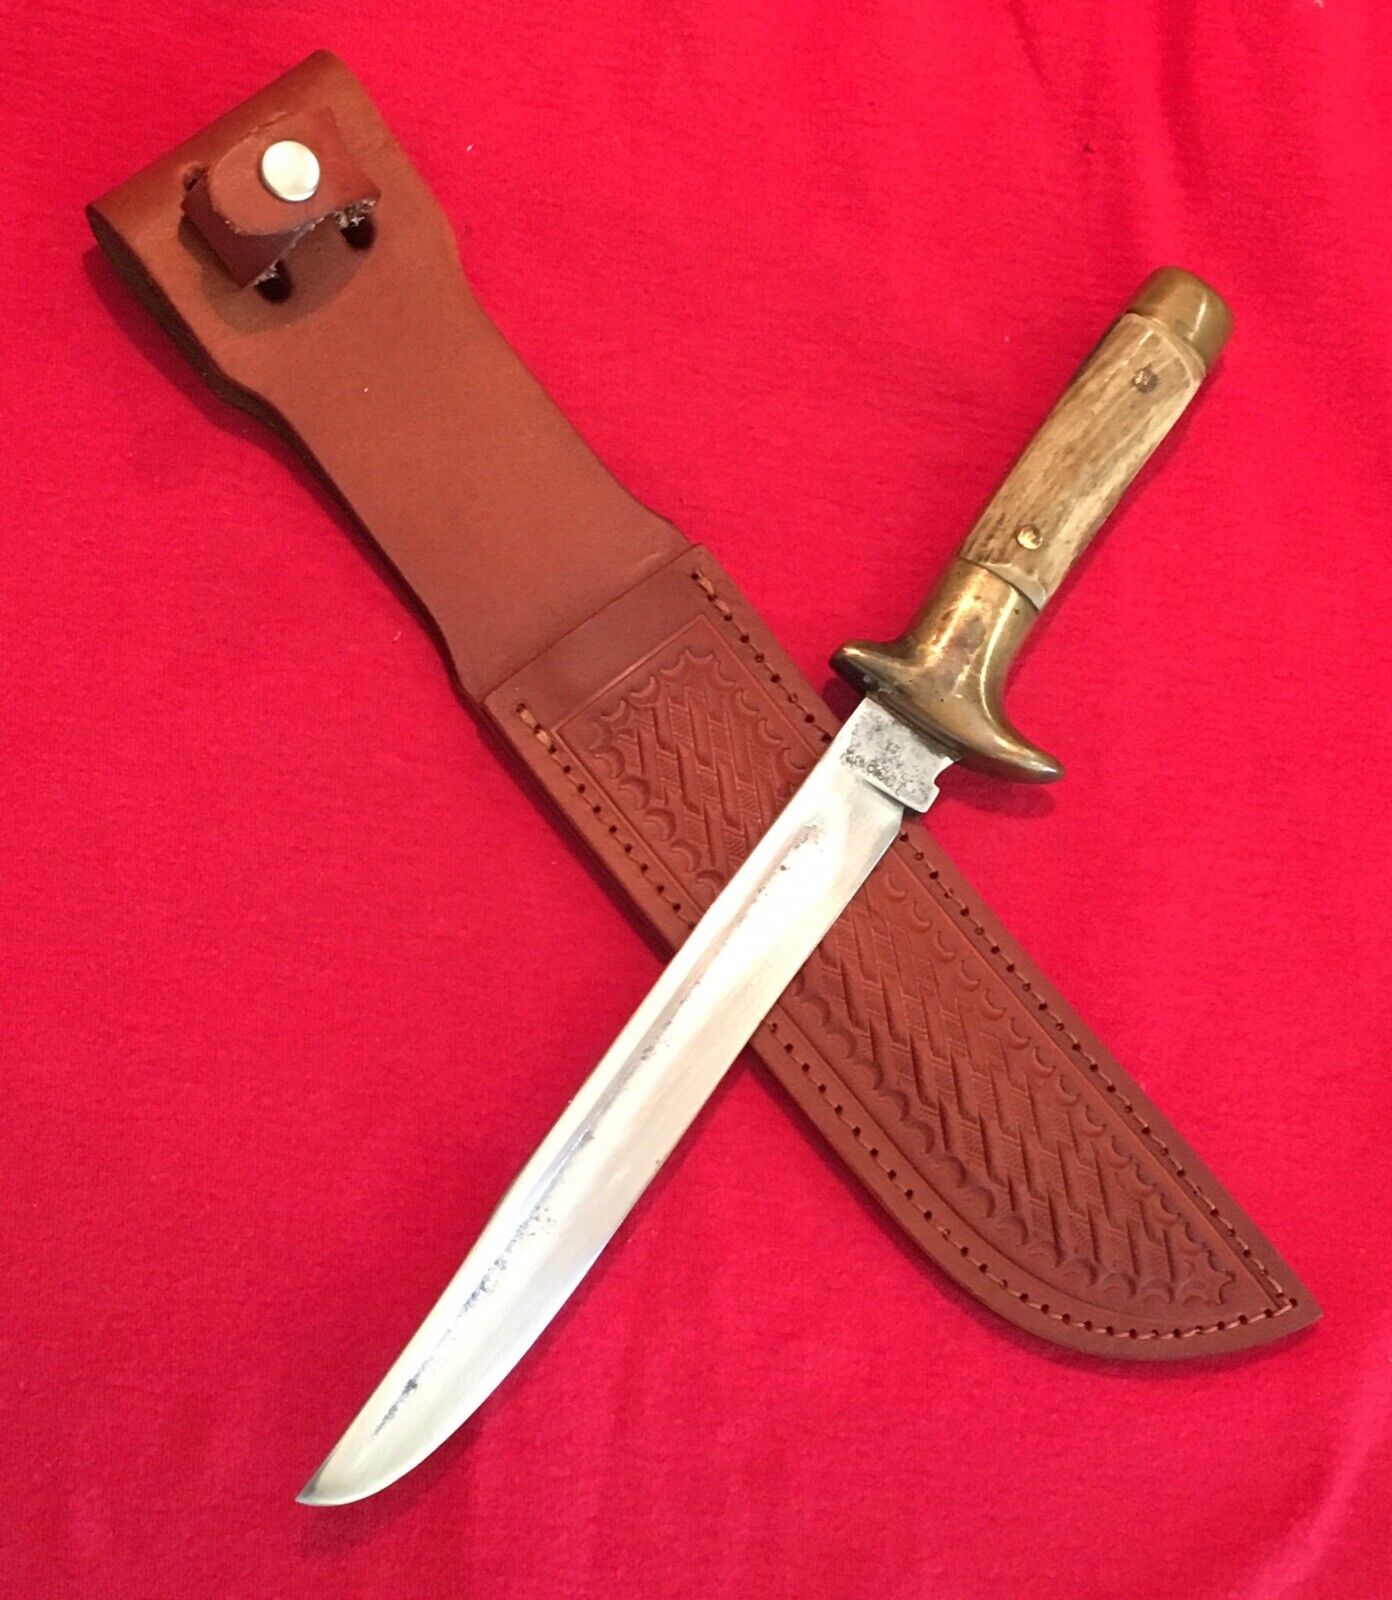 WW2 Theater Knife Made From A 1902 US MILITARY SWORD. - With New Leather Sheath